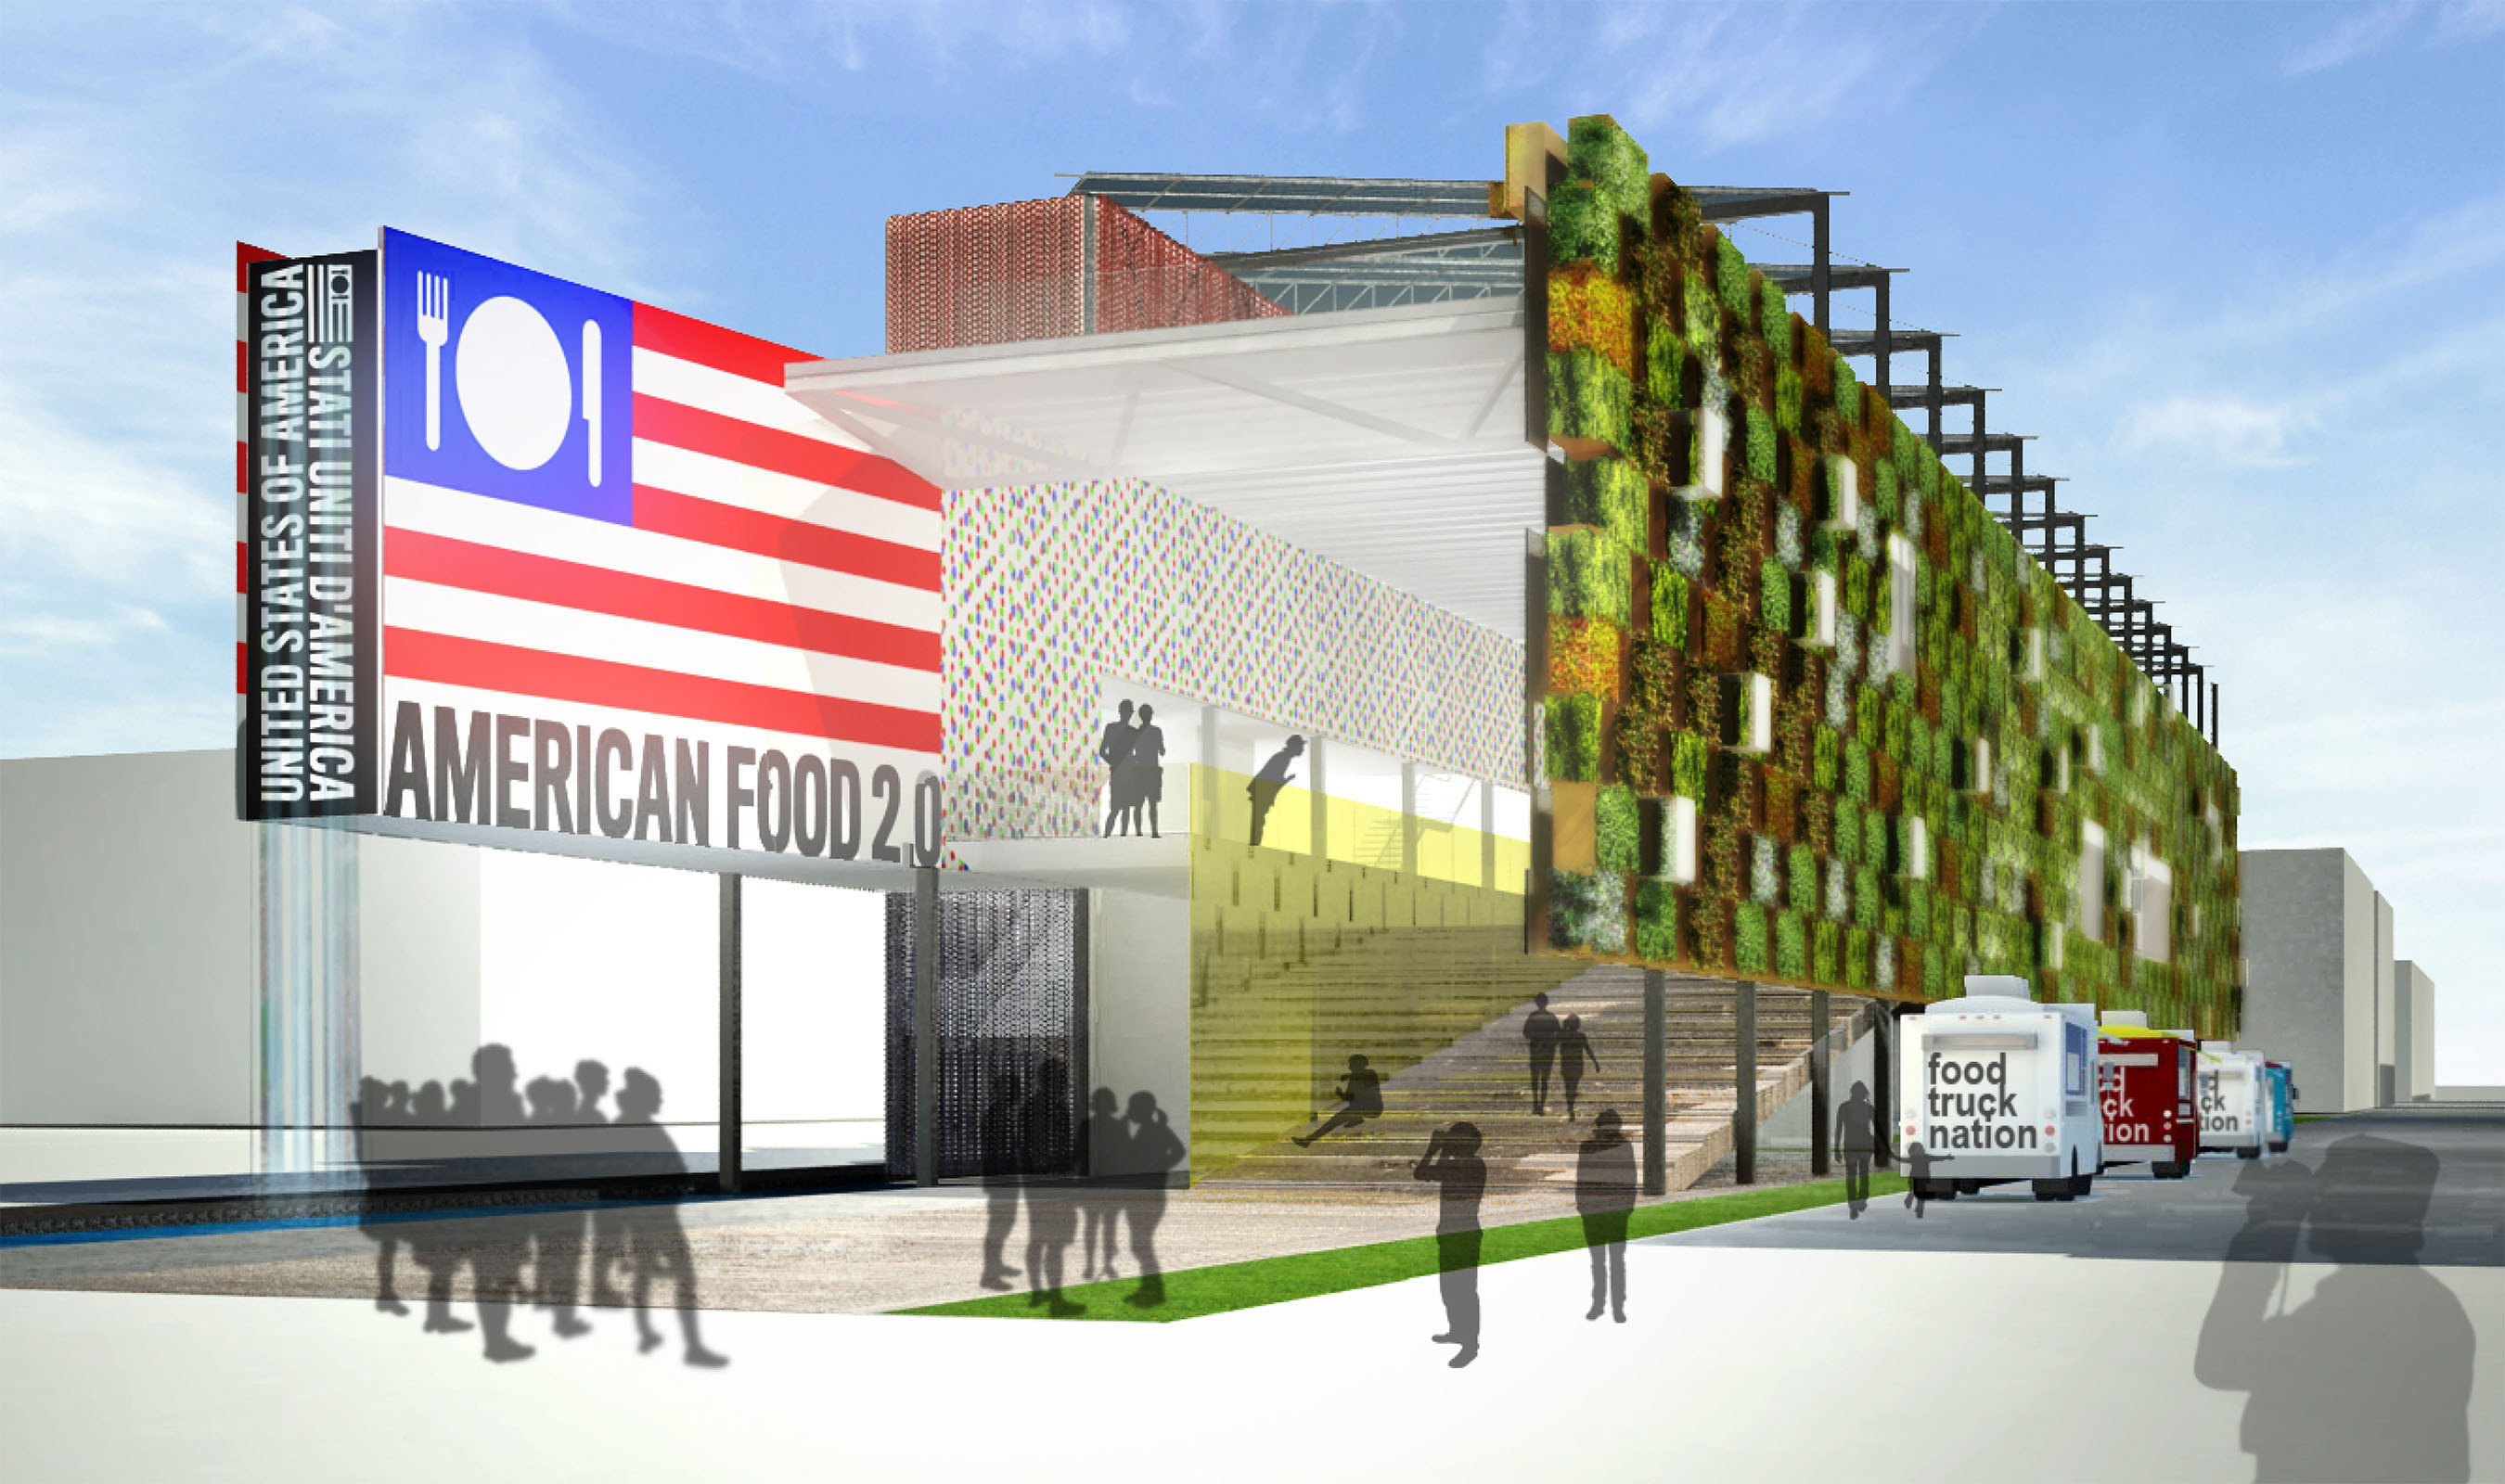 Rendering of the American Food 2.0 USA Pavilion at Expo Milano 2015; Biber Architects for Friends of the U.S. Pavilion Milano 2015 (c)2014. (PRNewsFoto/Friends of the U.S. Pavilion Milano 2015) (PRNewsFoto/FRIENDS OF US PAVILION MILANO)